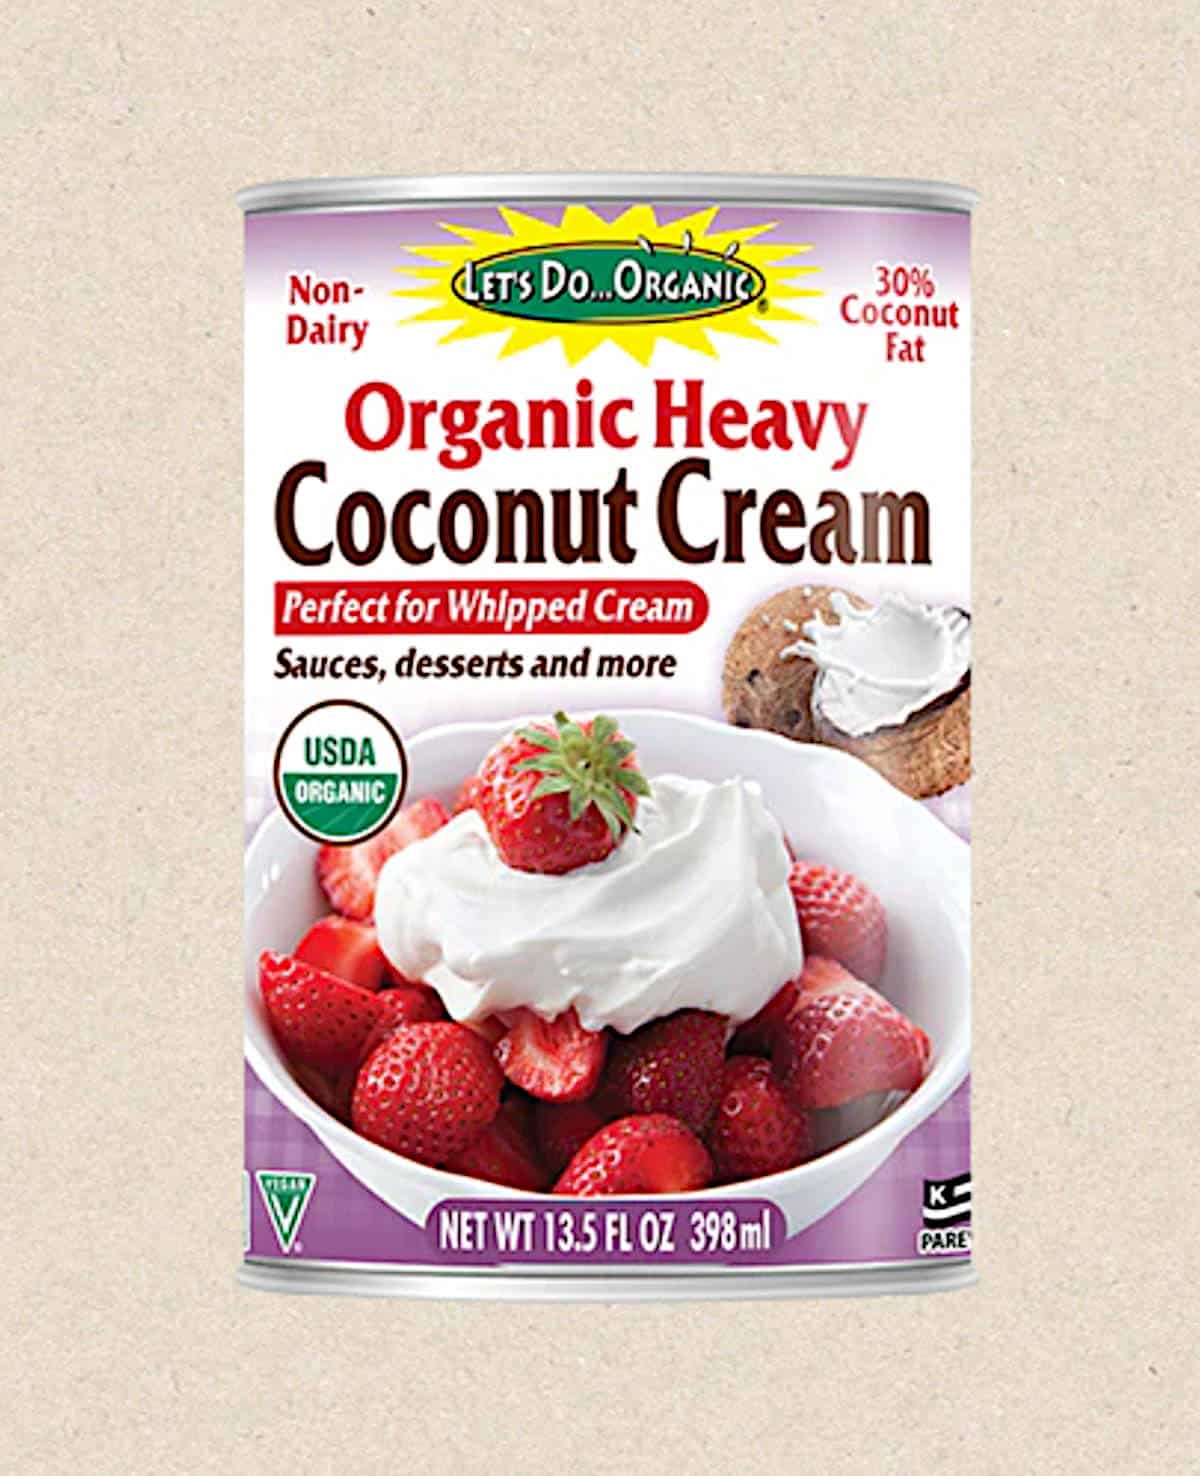 Can of Let's Do Organic Heavy Coconut Cream.